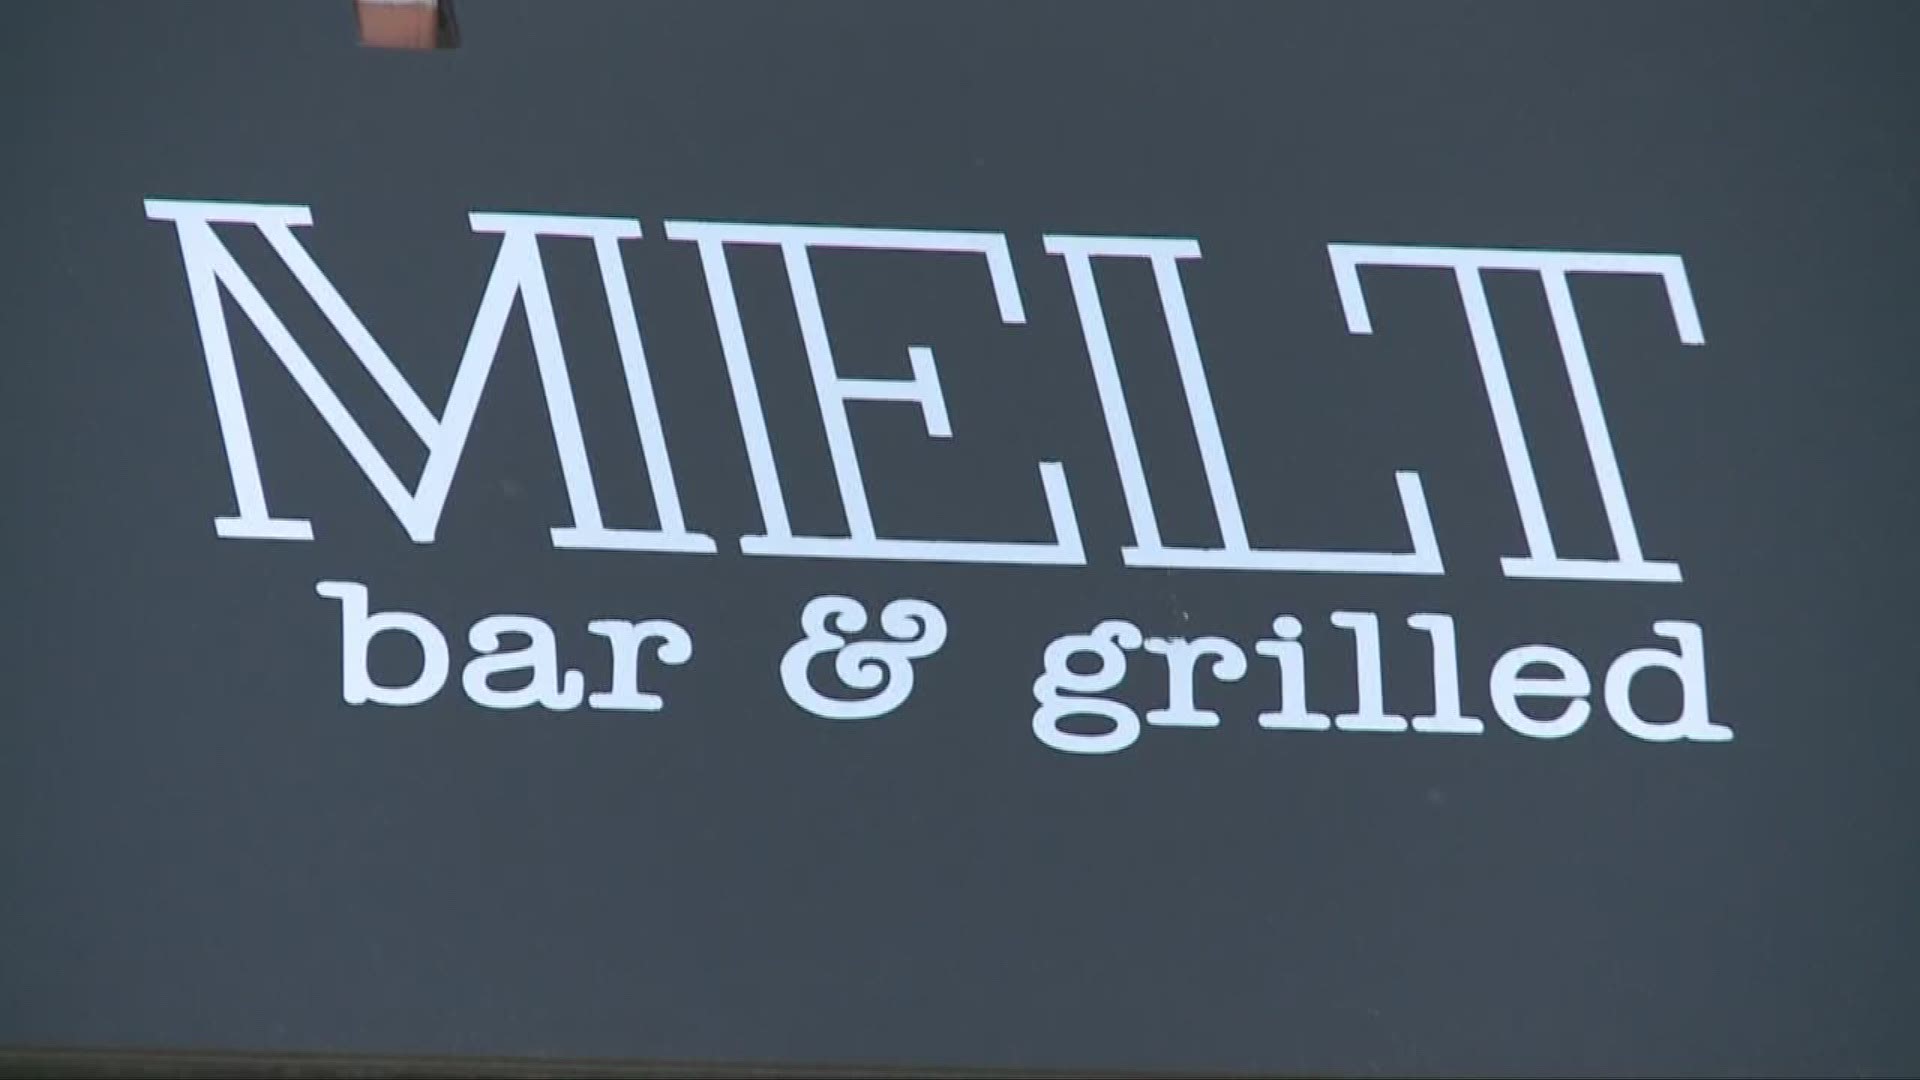 March 27, 2018: The original Melt Bar and Grilled restaurant in Lakewood is closing Sunday, April 1 for a 26-day renovation project. Matt Fish, the owner and founder of Melt, said the goal is to modernize the restaurant.